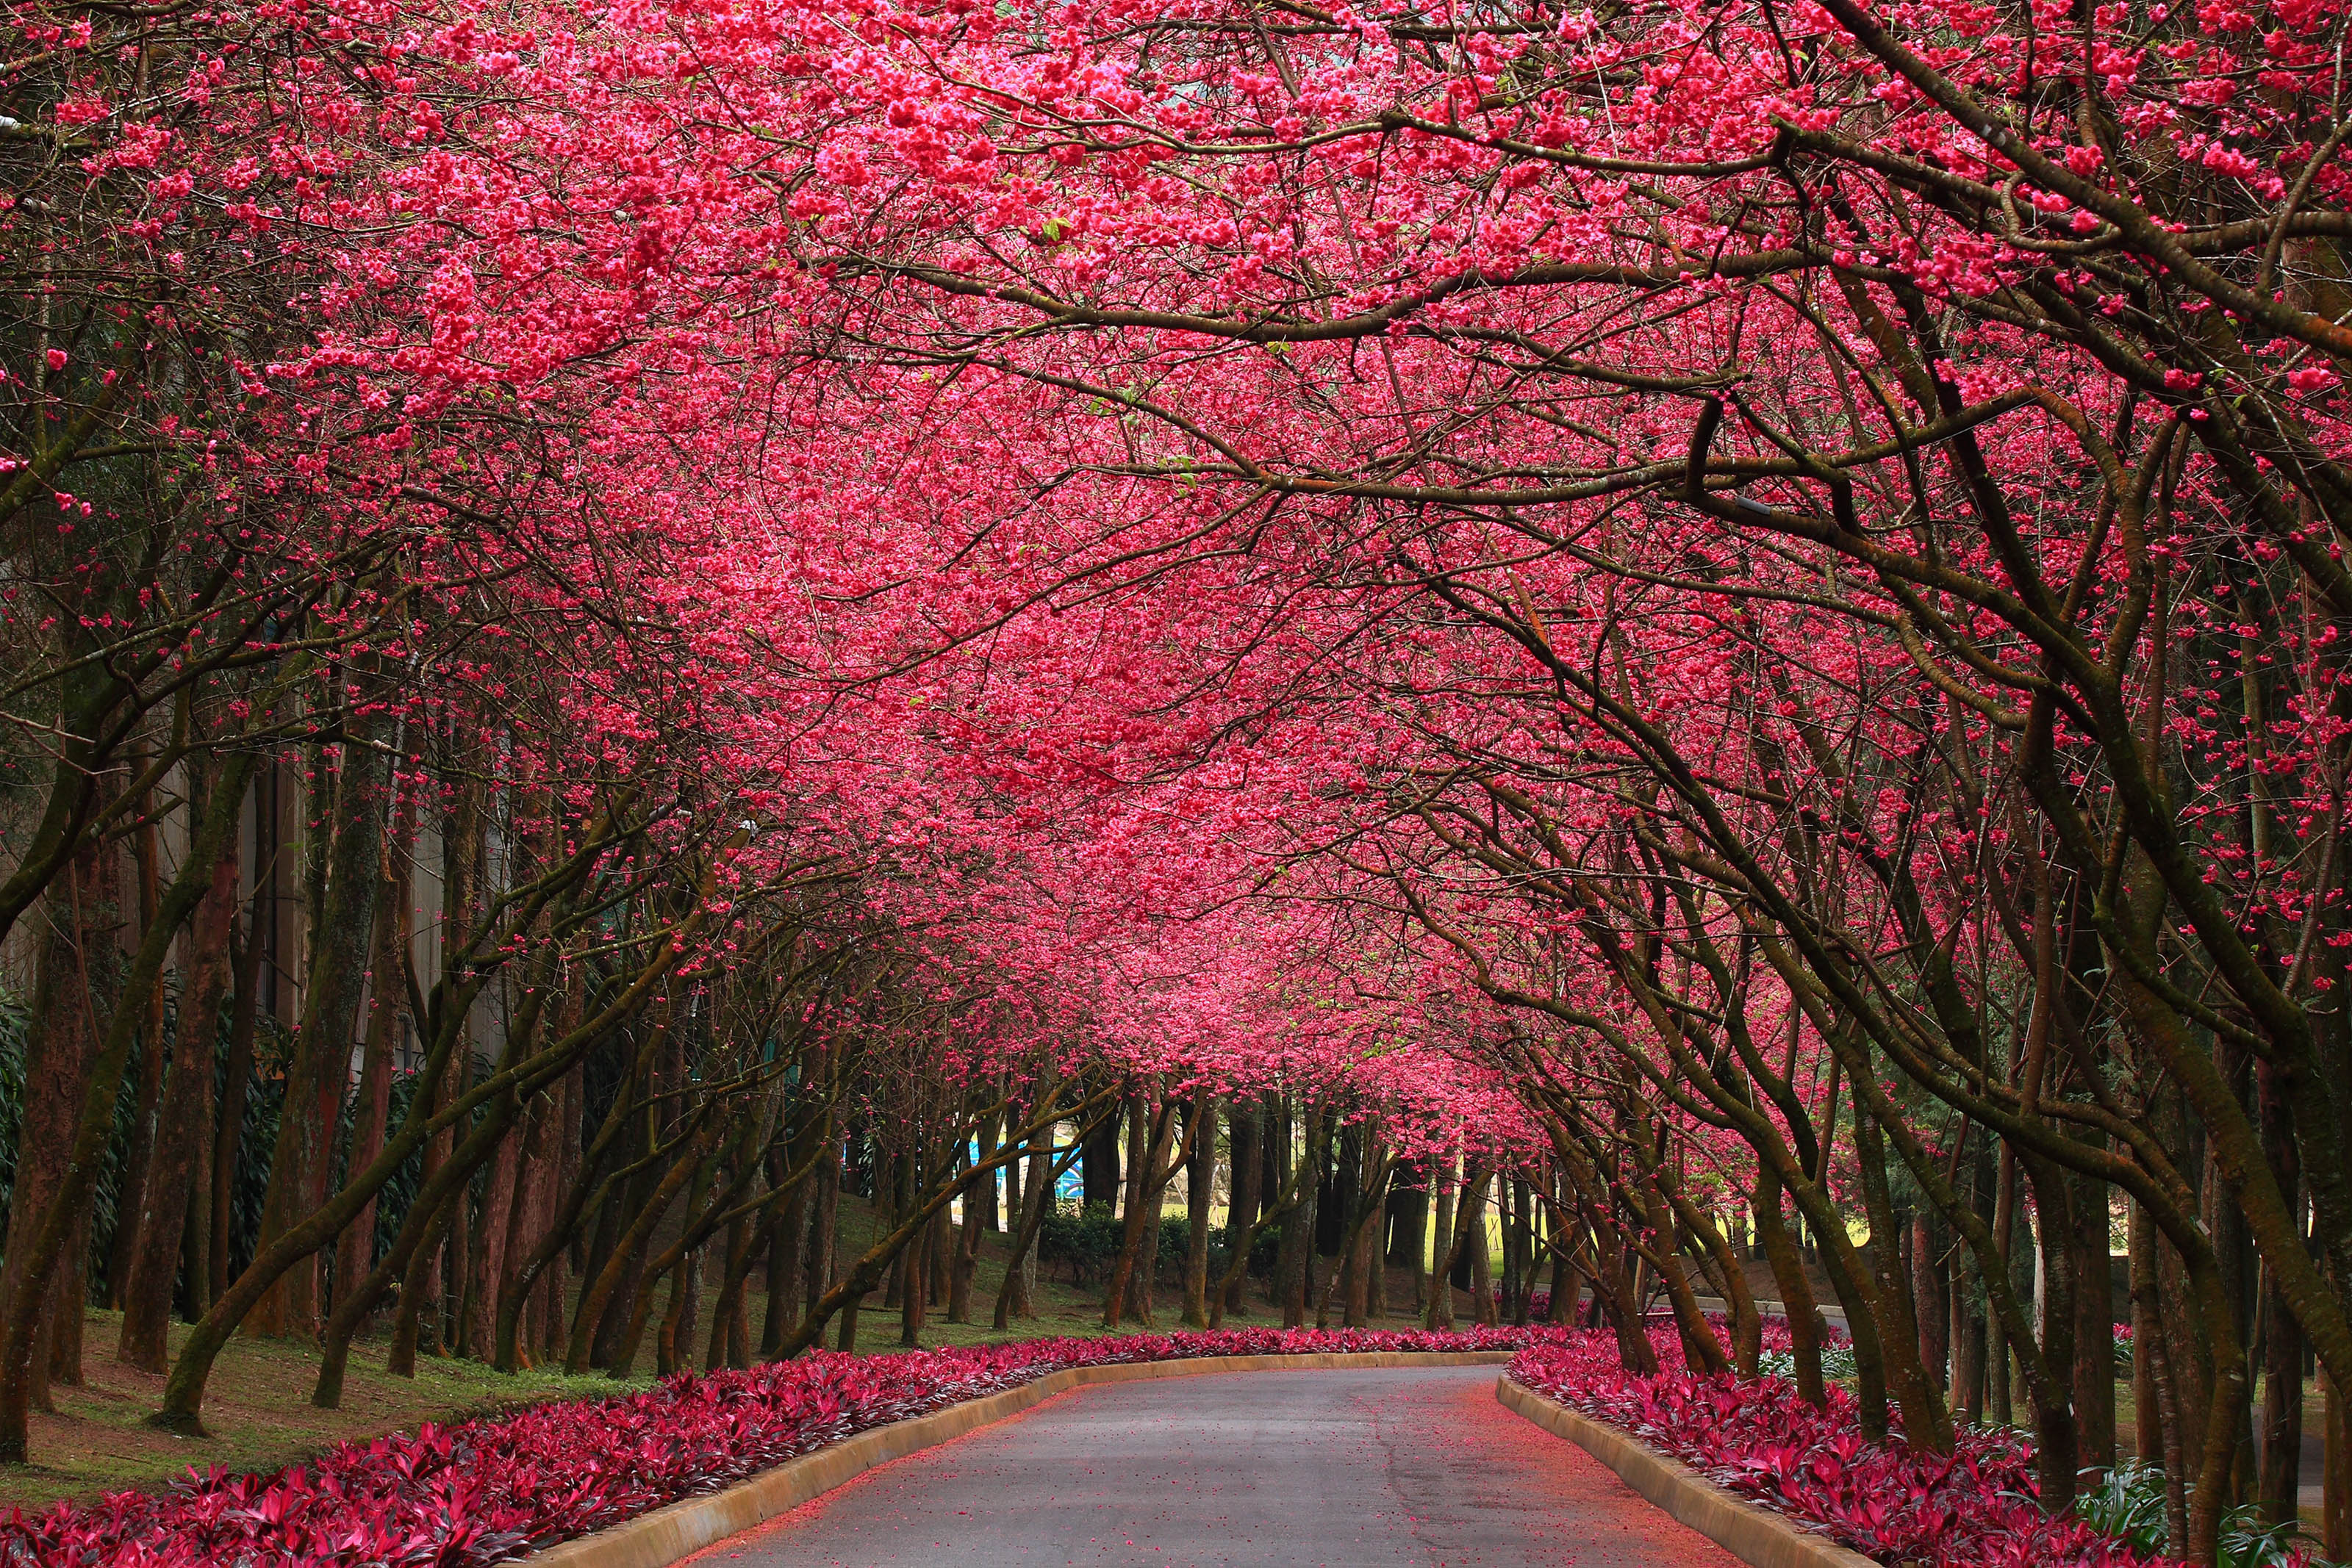 Pink Nature Wallpaper In HD With Flowering Trees